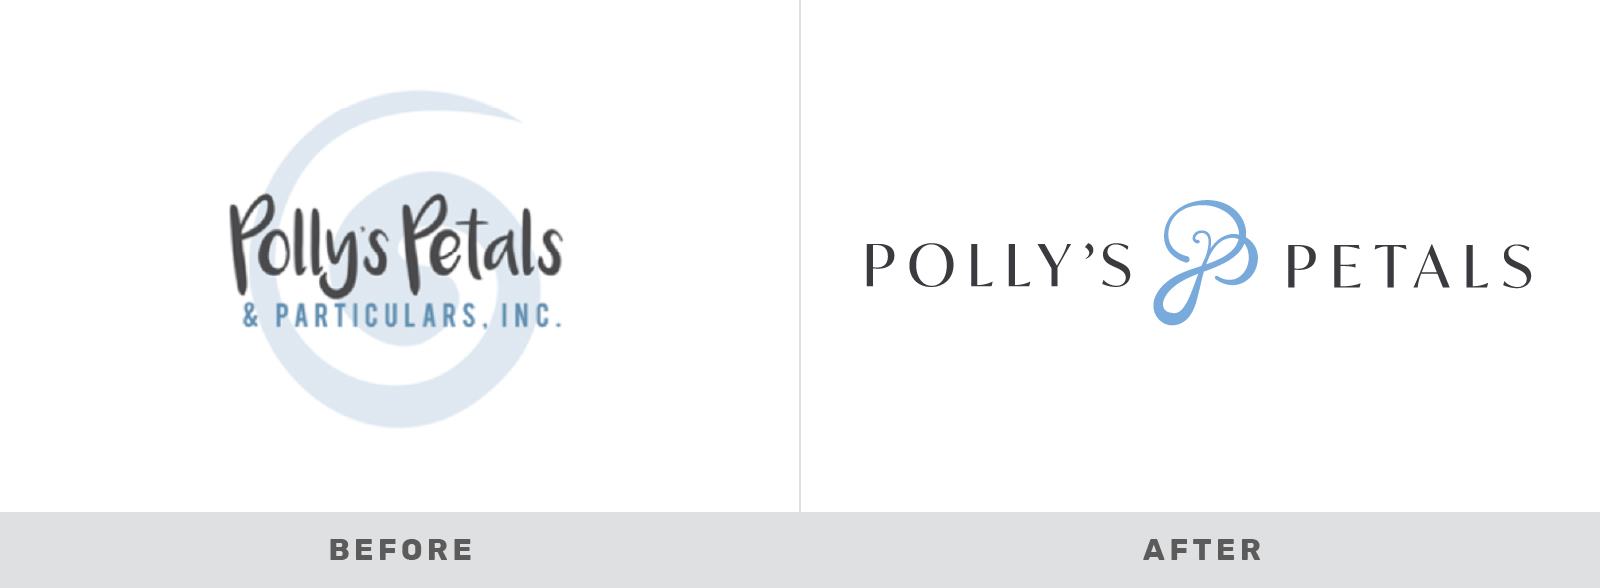 The old Polly's Petals logo with a swirl is next to the new Polly's Petals logo, which has a custom 